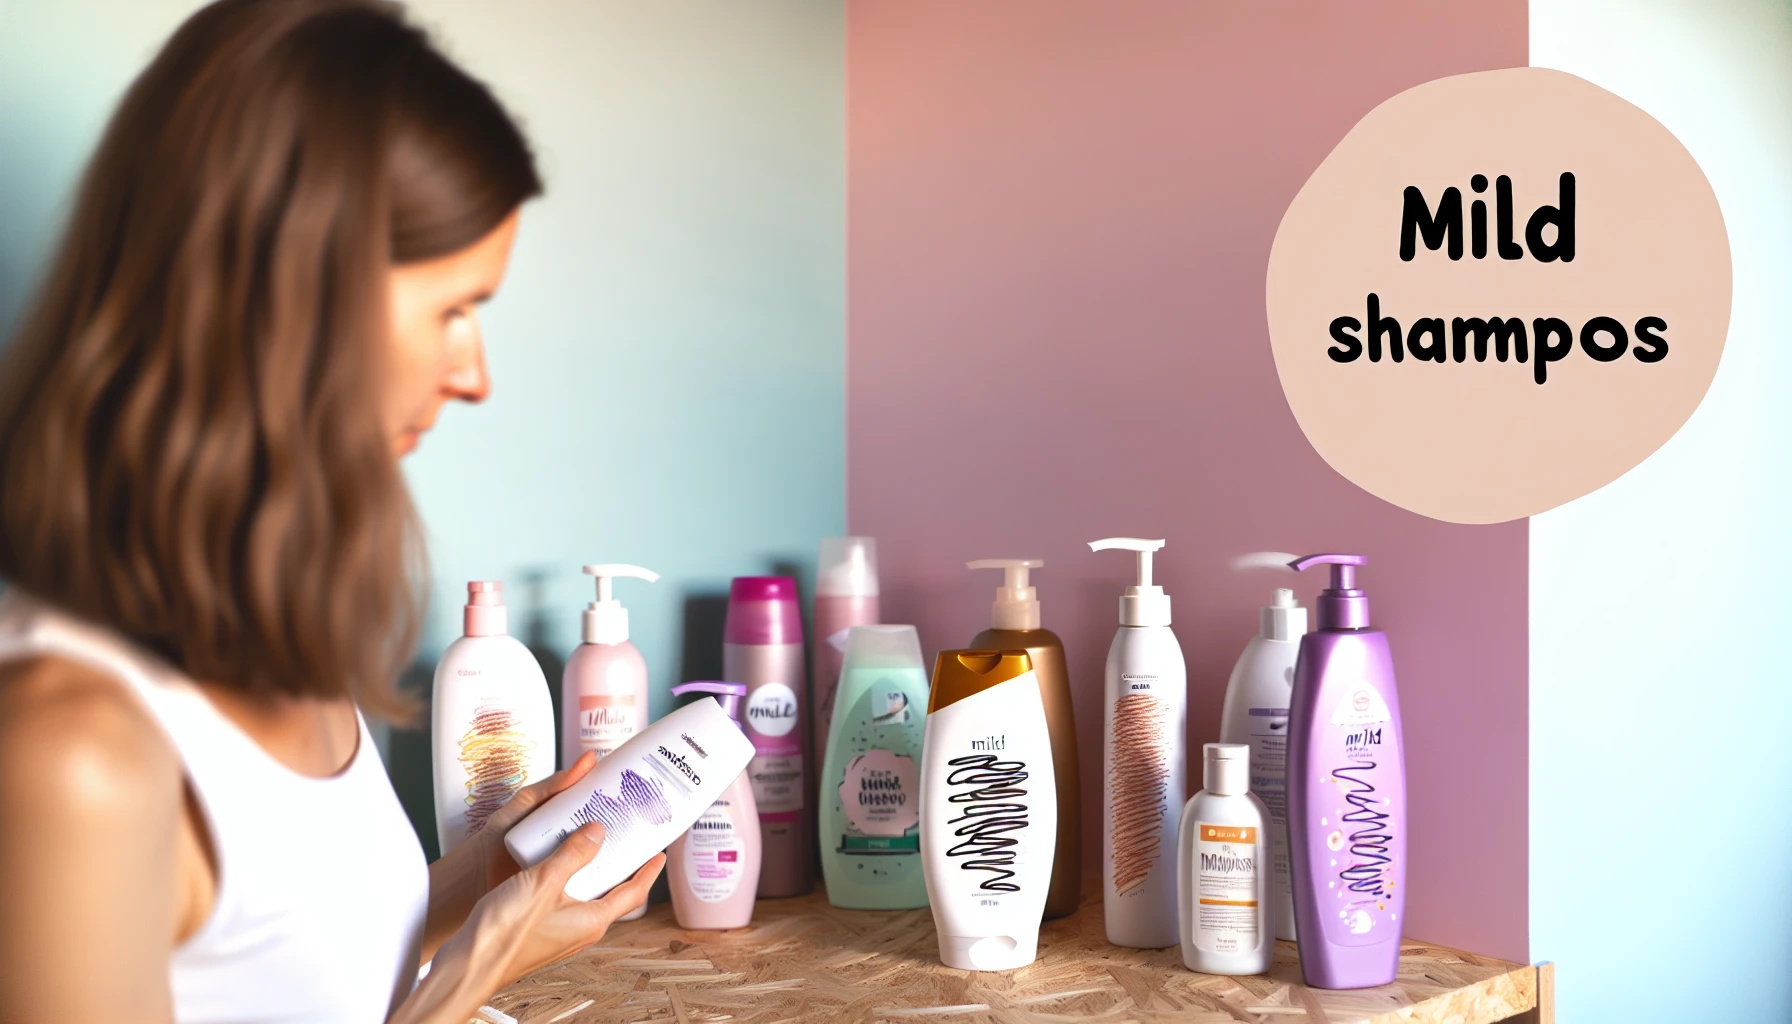 Photo of different types of mild shampoos